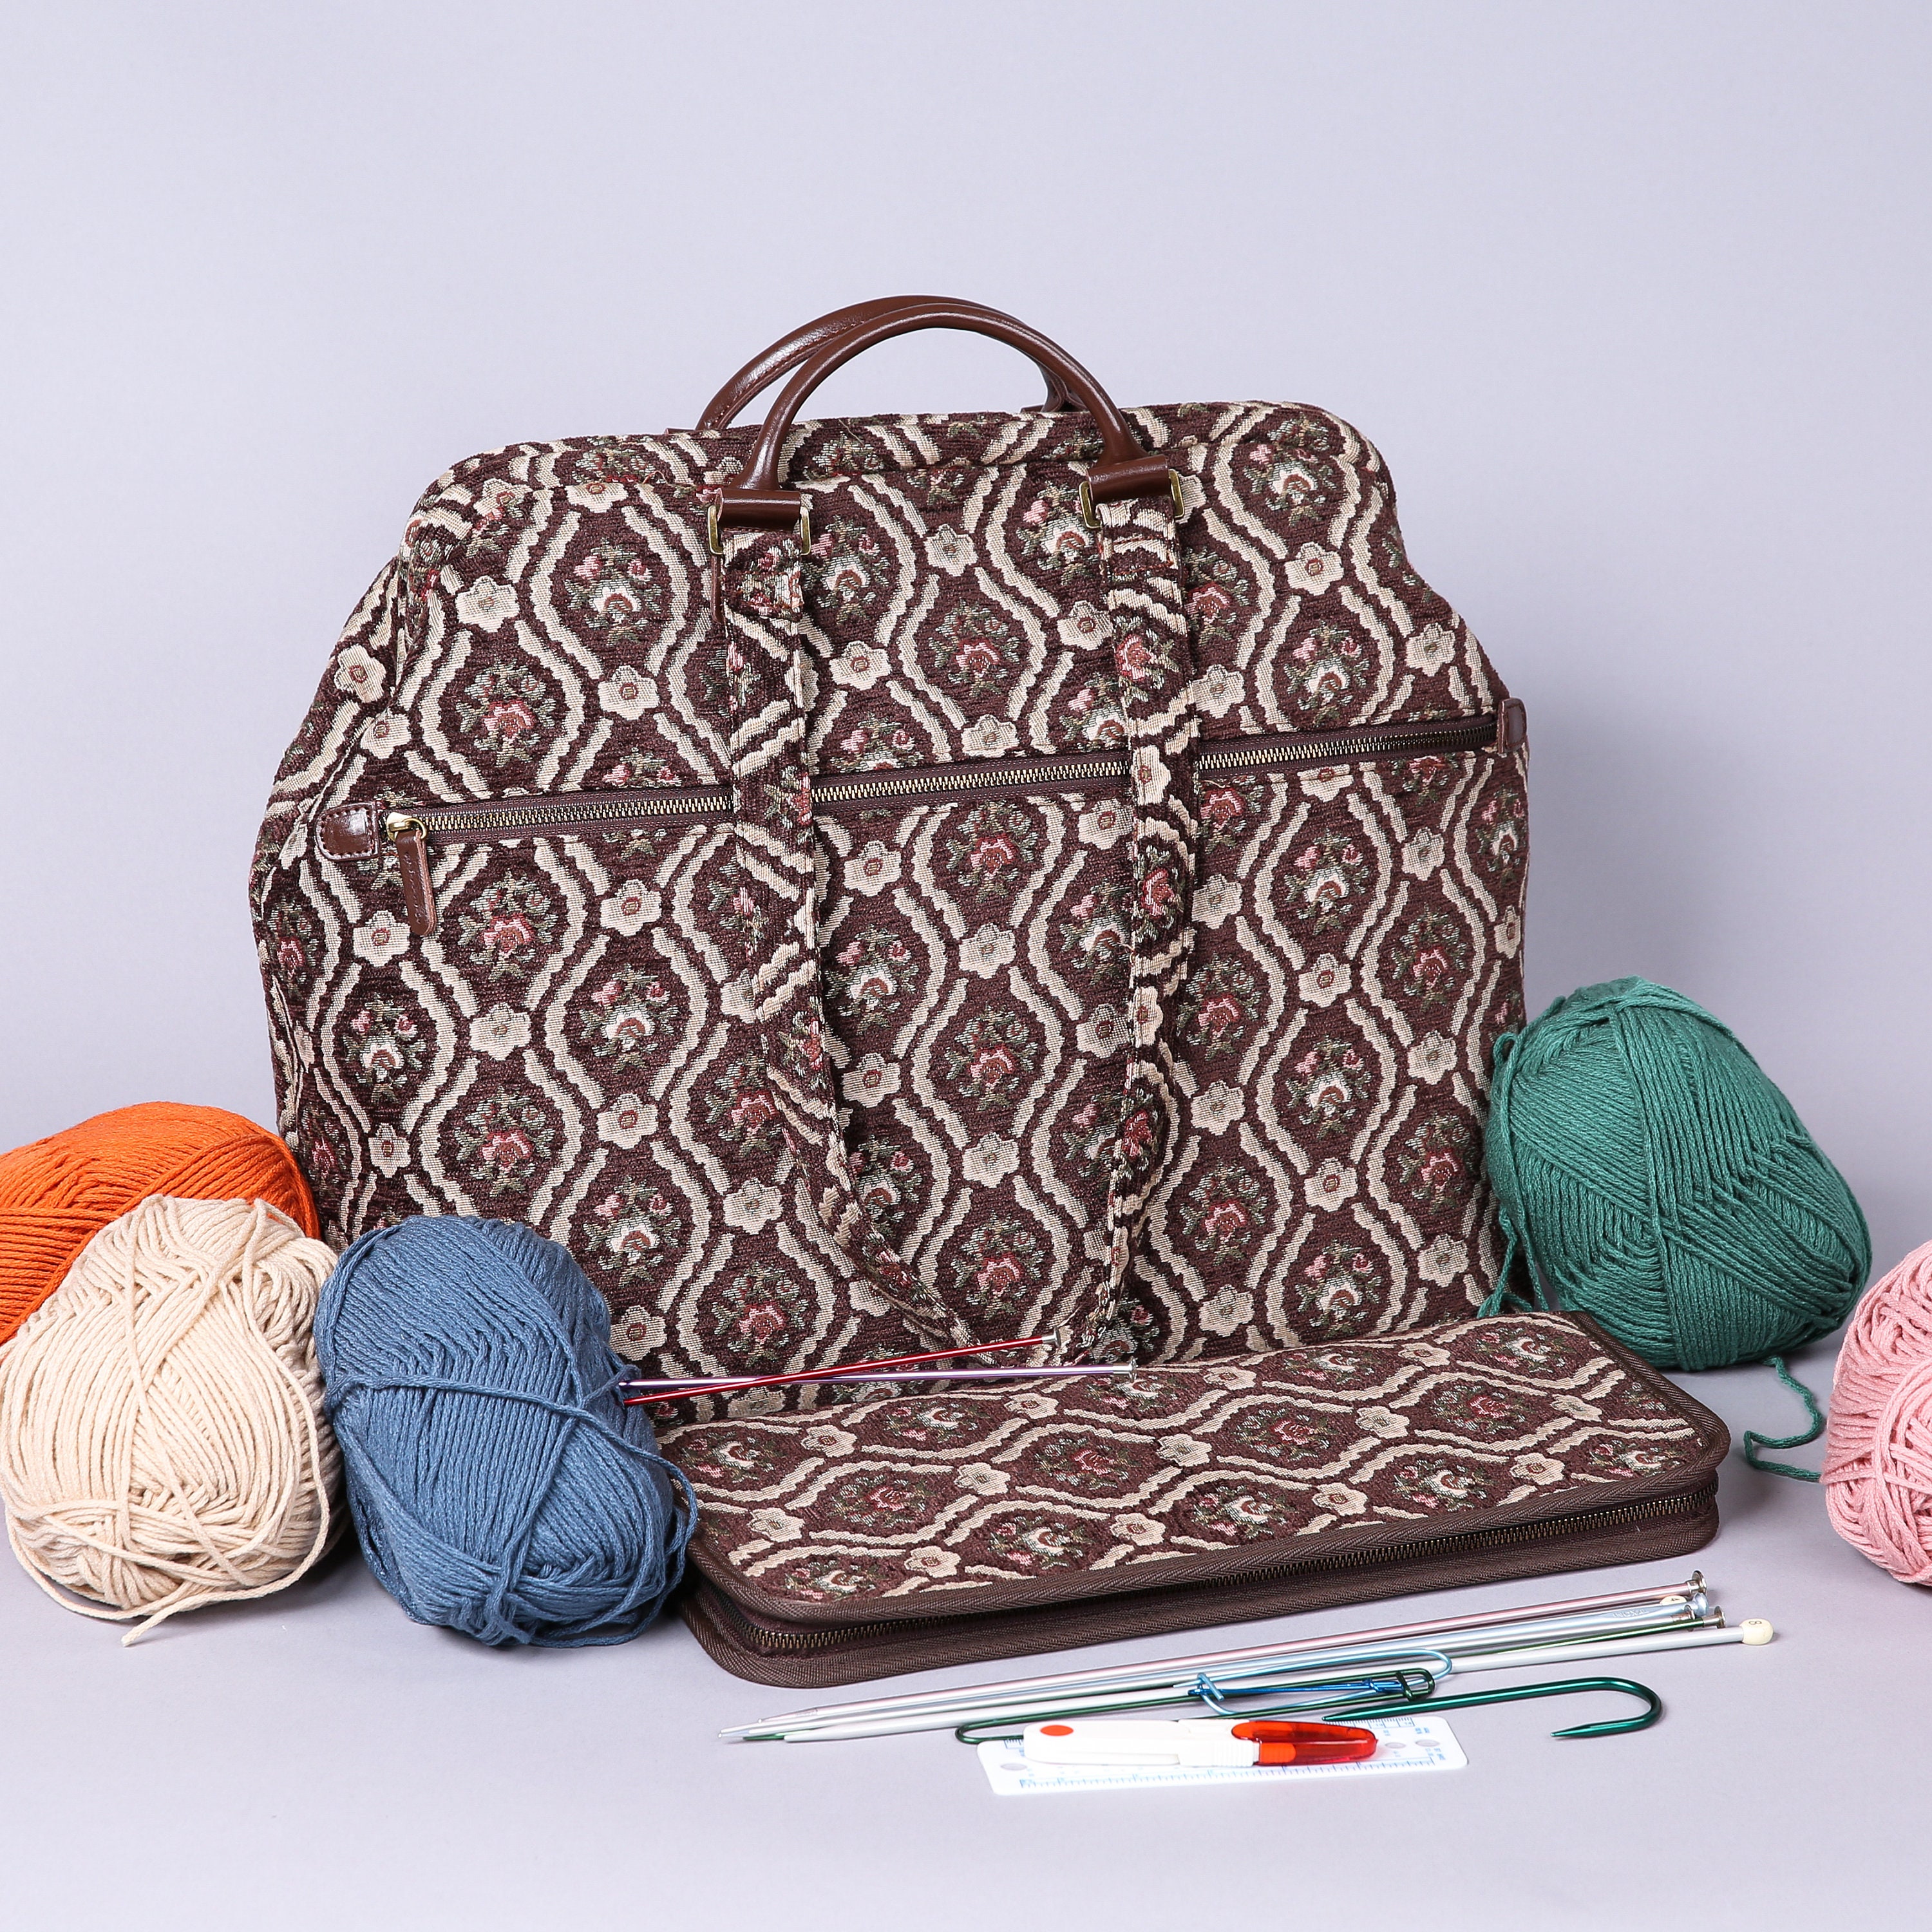 My Knitting Notions Storage: Like Mary Poppins' Carpet Bag, Only